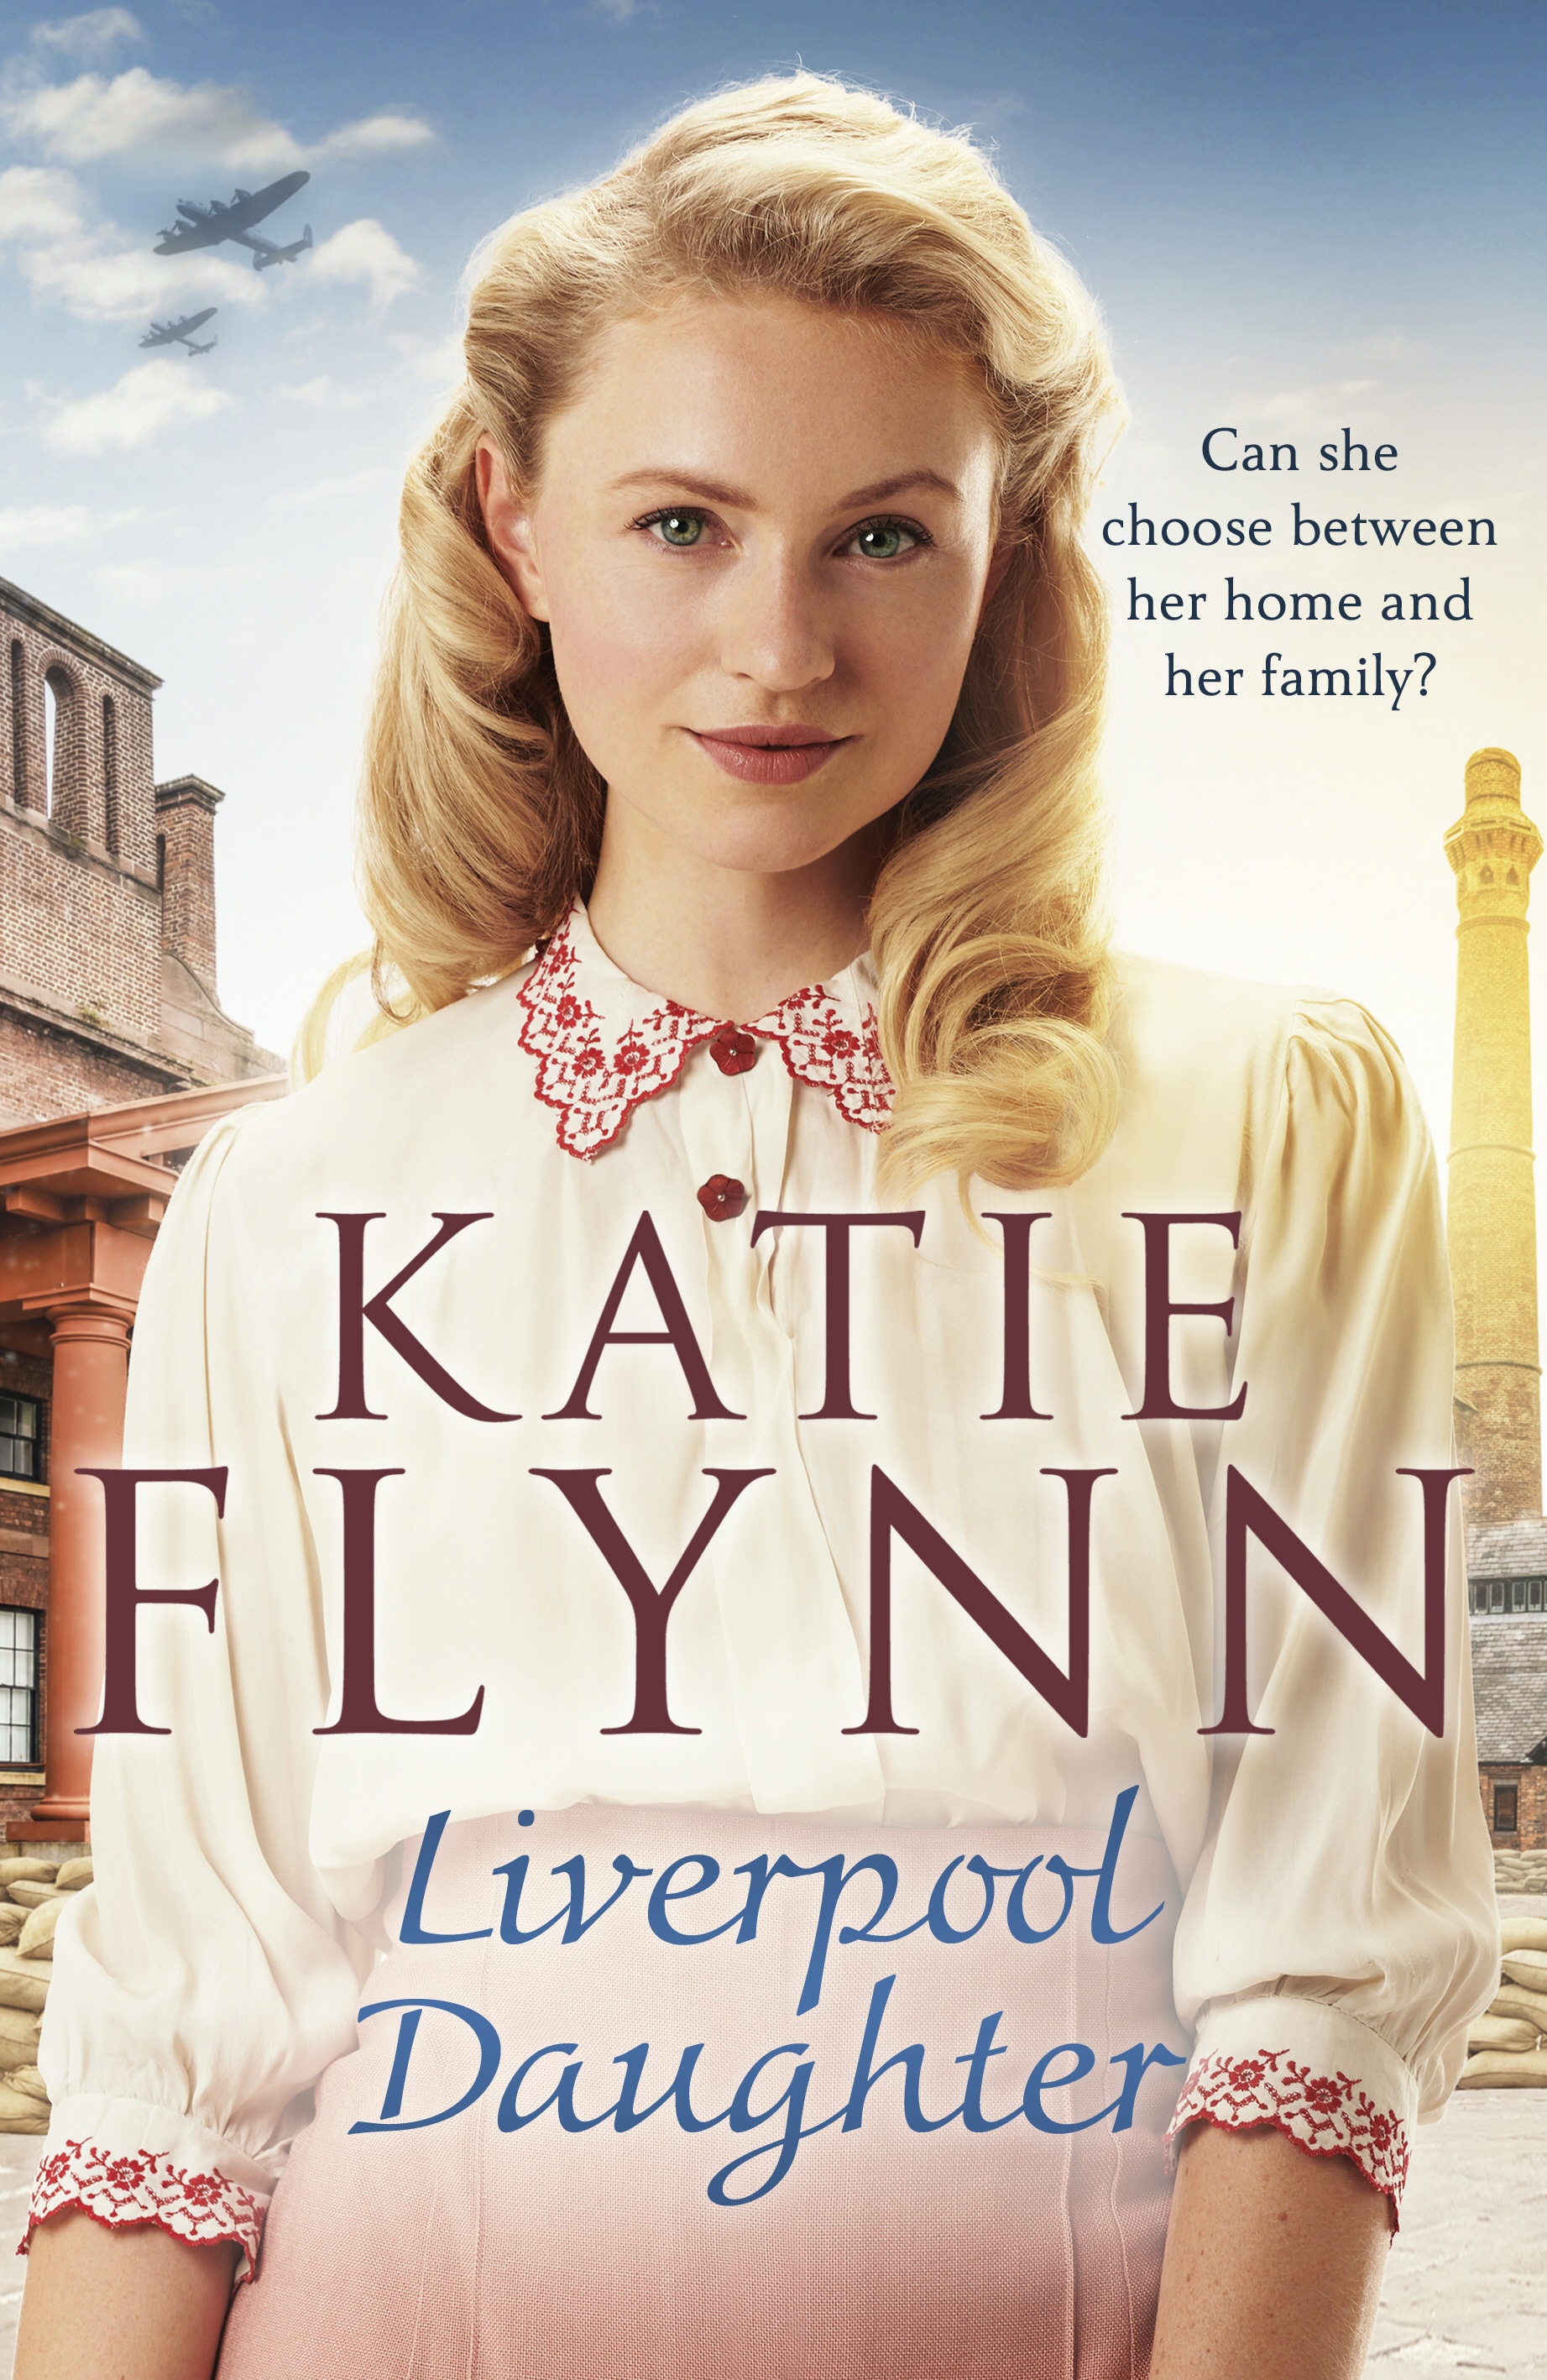 Book “Liverpool Daughter” by Katie Flynn — March 5, 2020